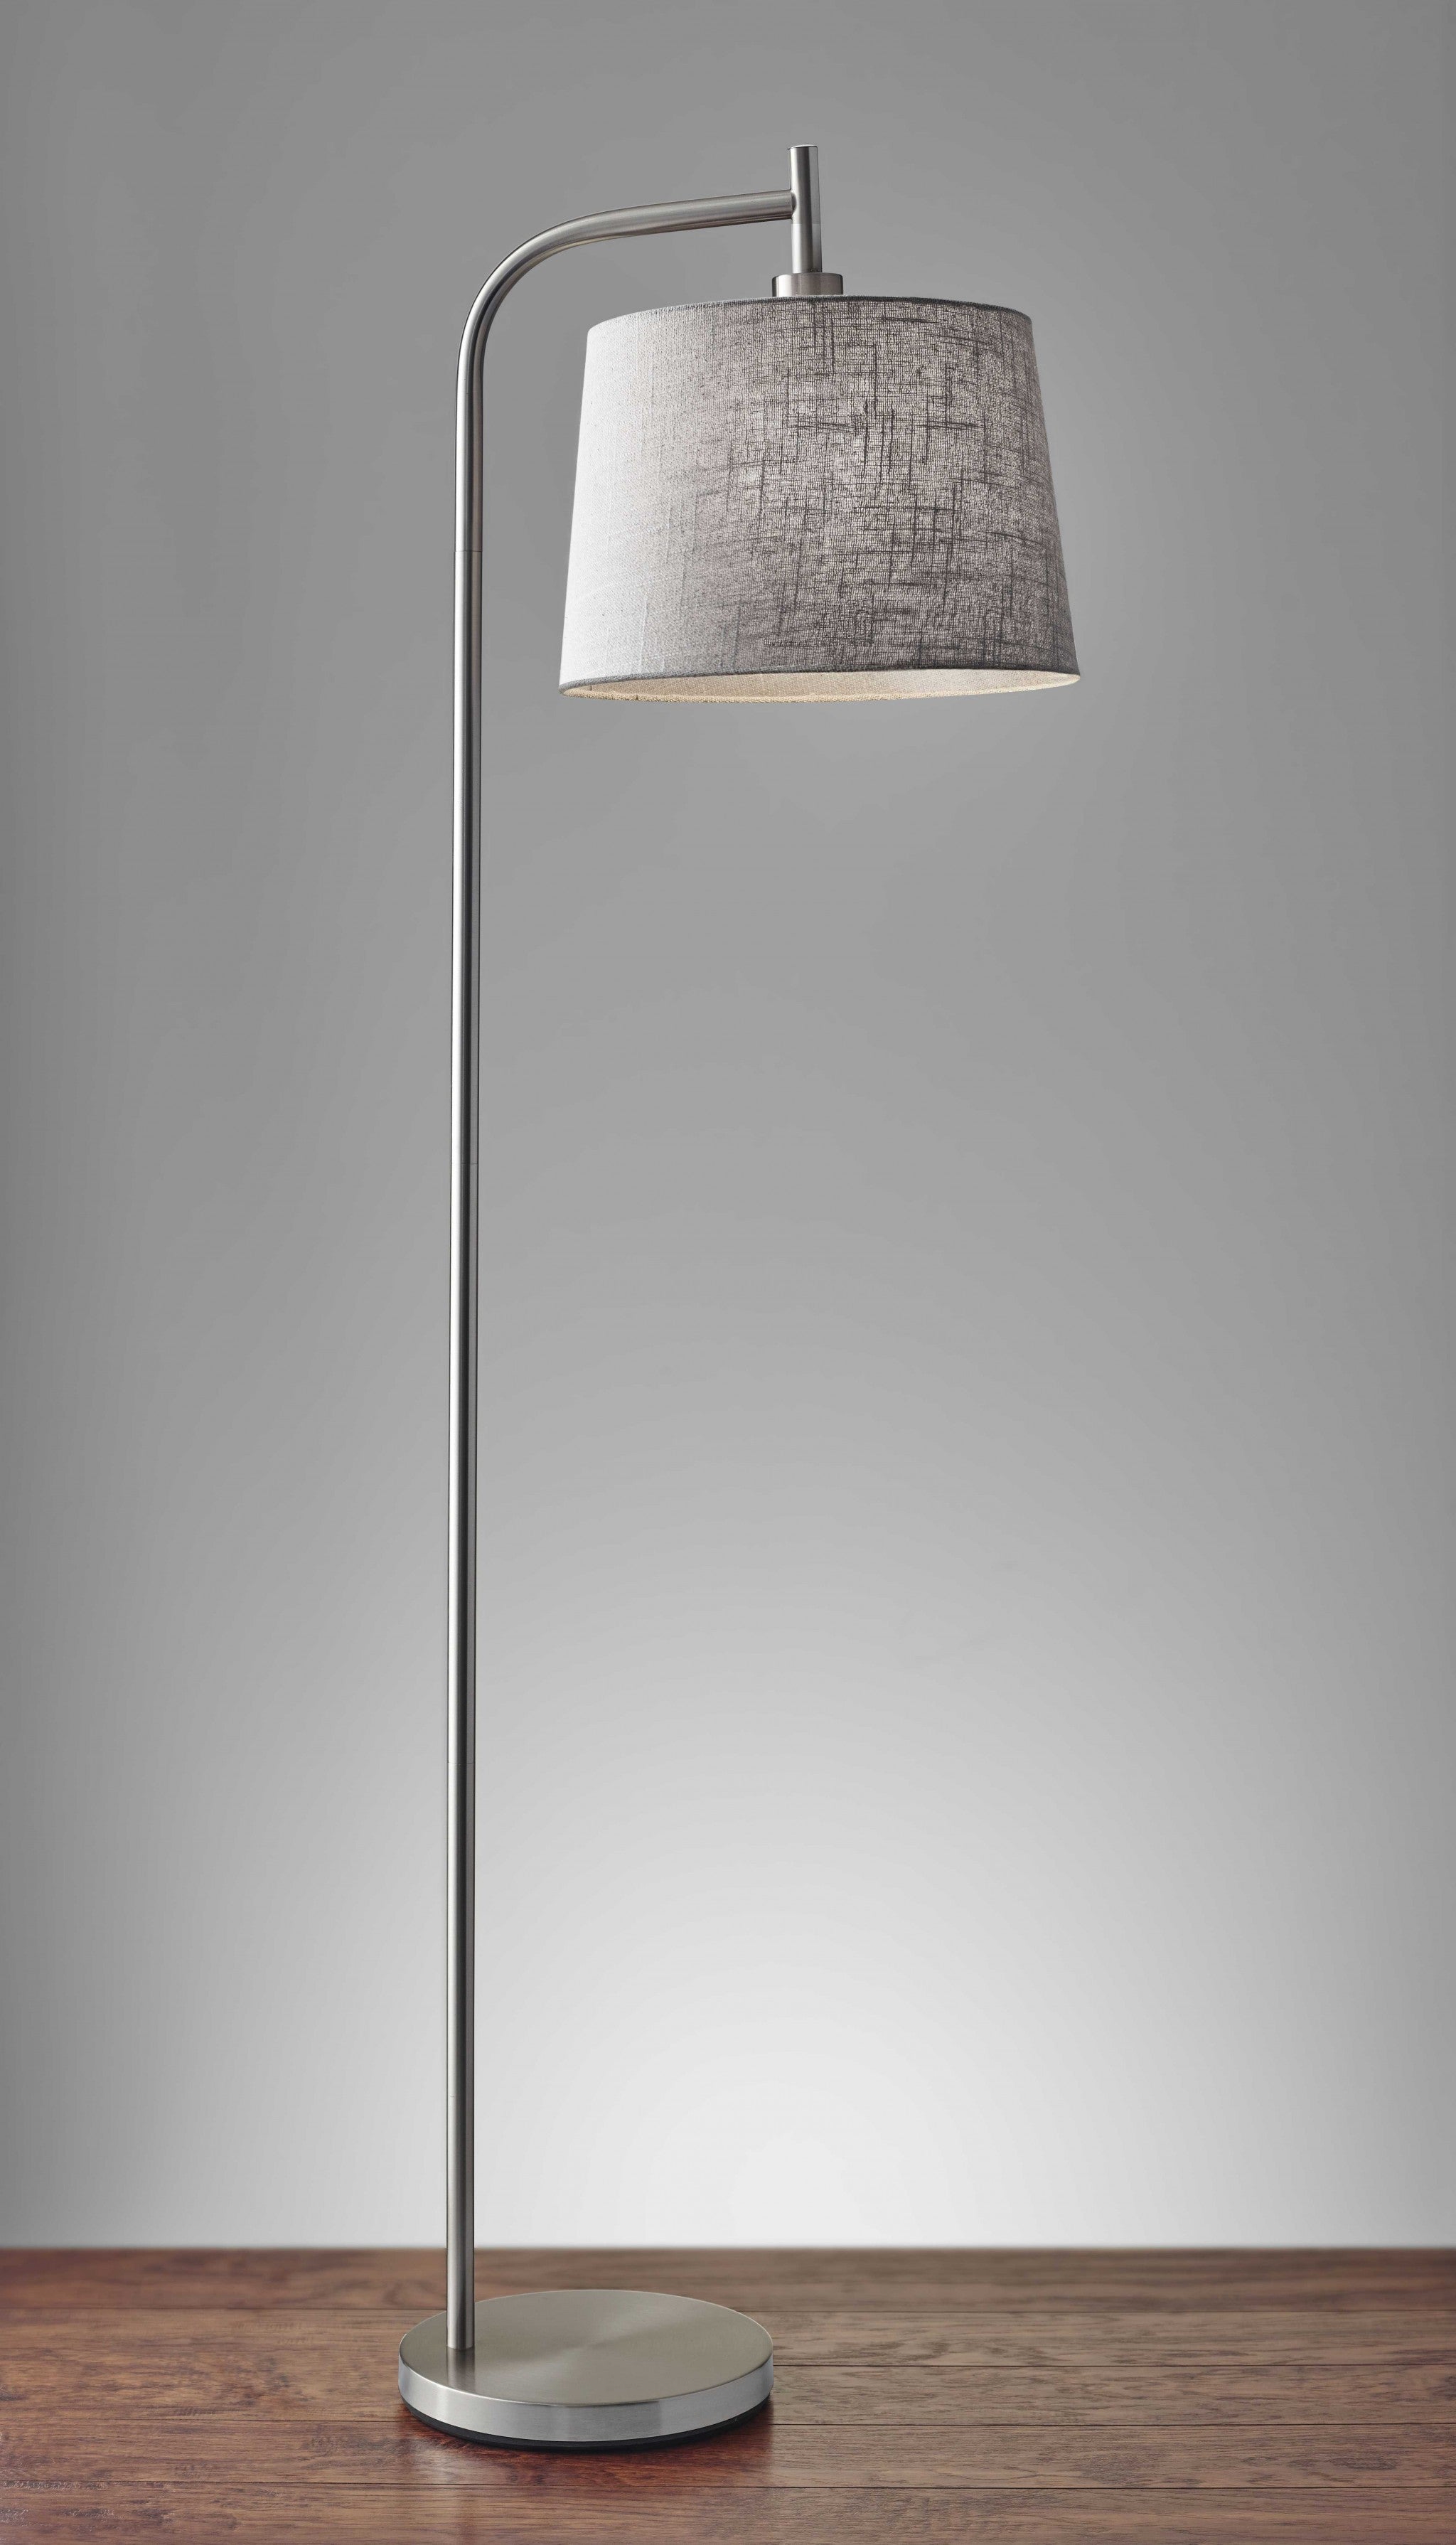 58" Swing Arm Floor Lamp With Gray Drum Shade